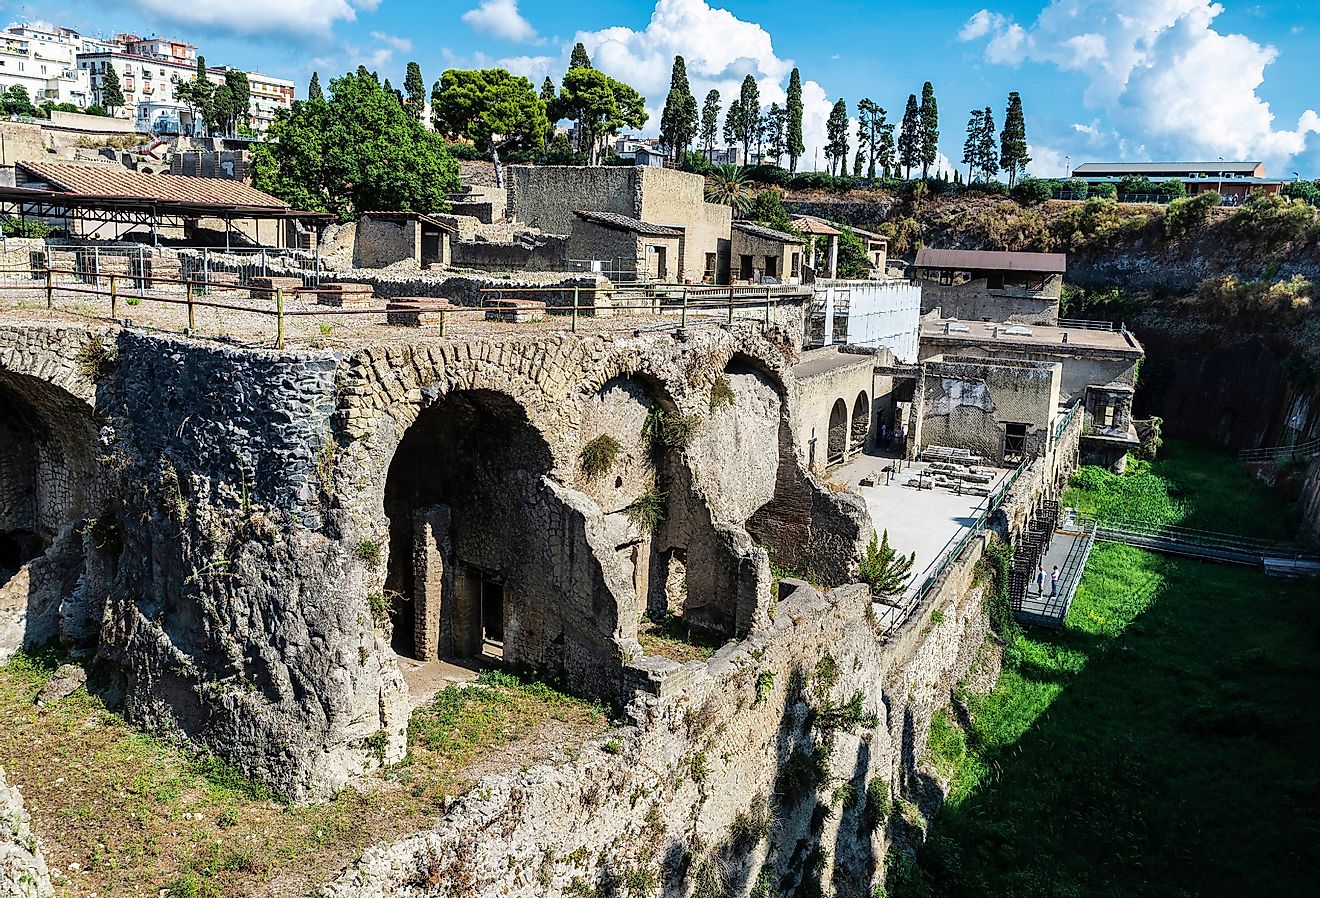 Ruins of the ancient archaeological site in Herculaneum, Italy.